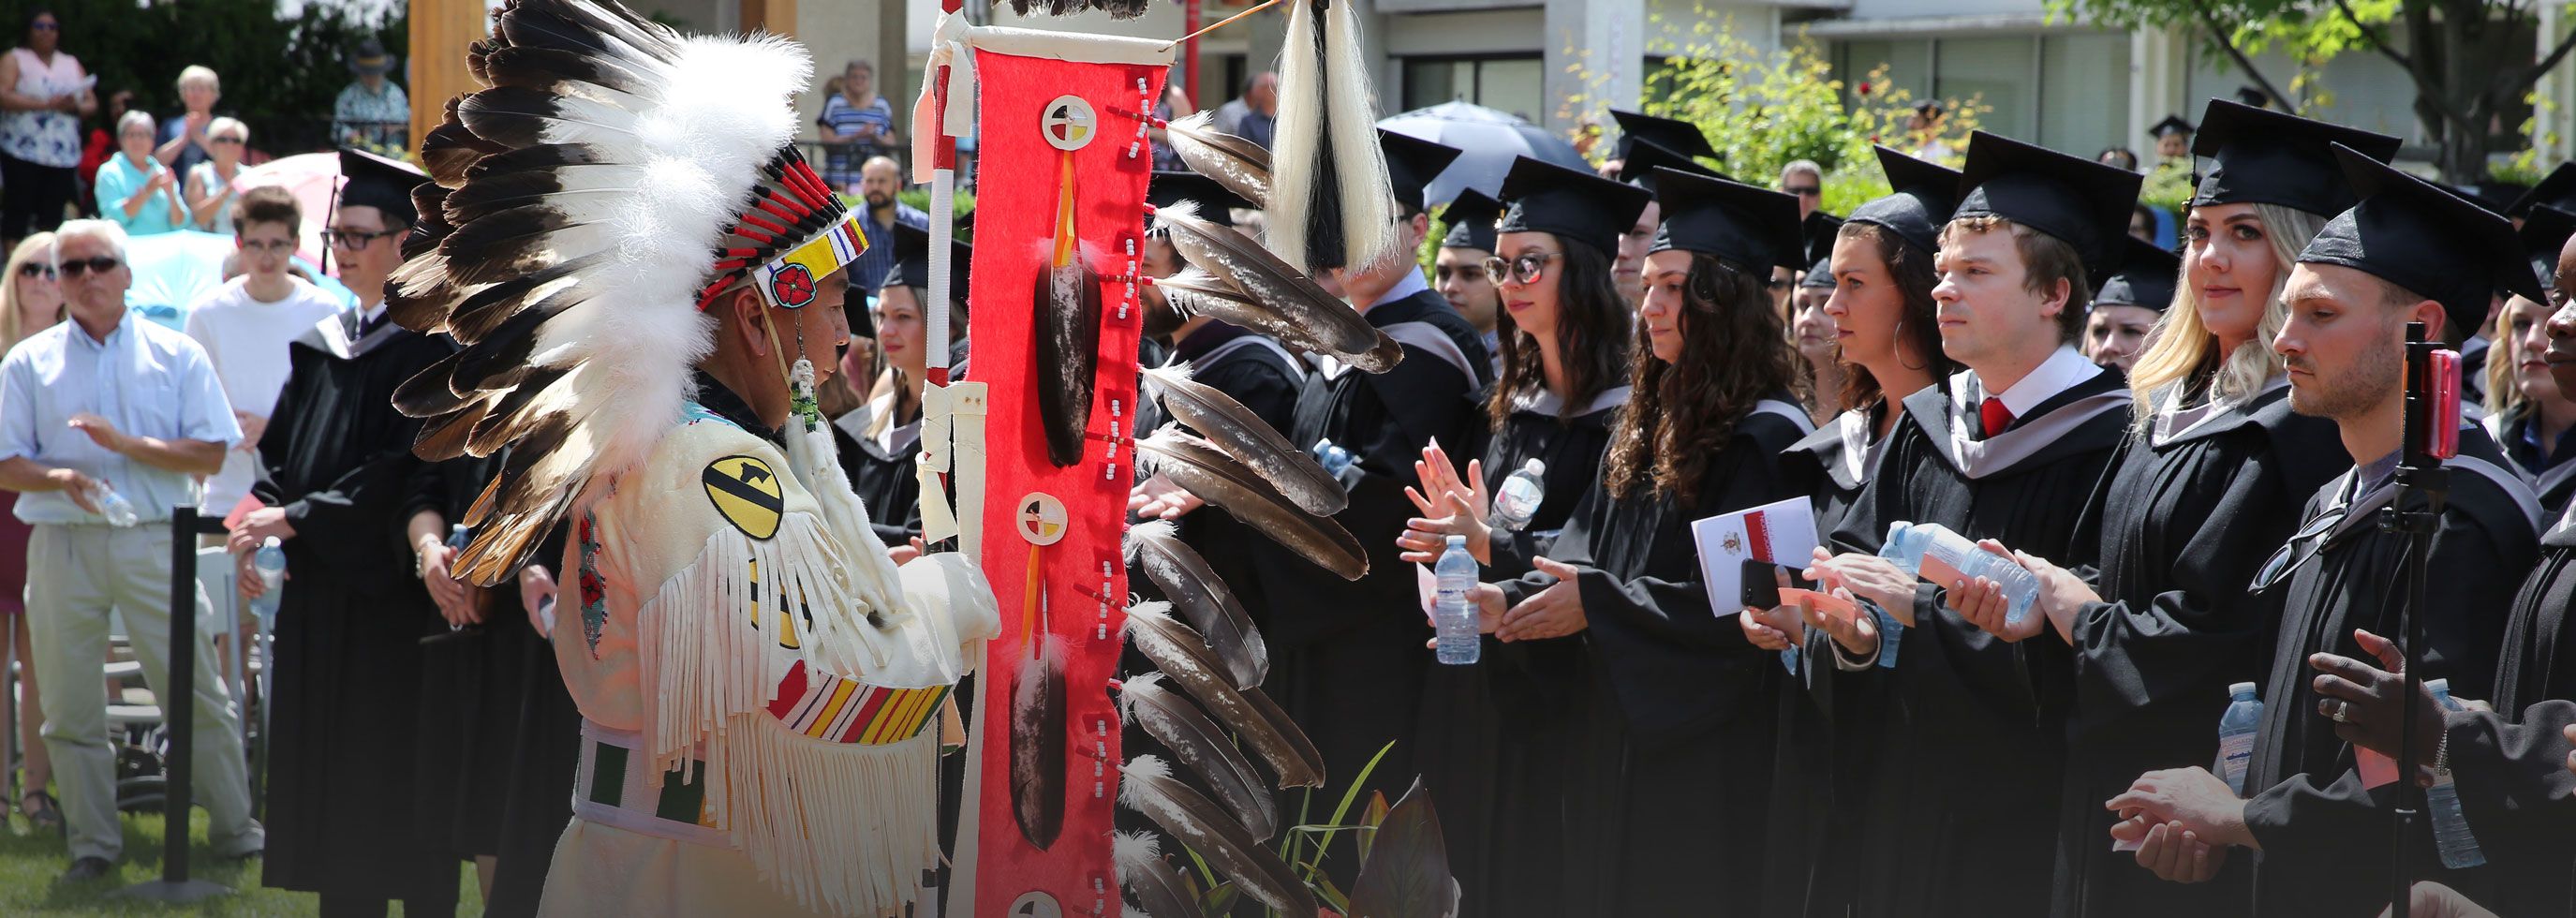 Indigenous elder carrying the Eagle Feather Staff at a convocation ceremony